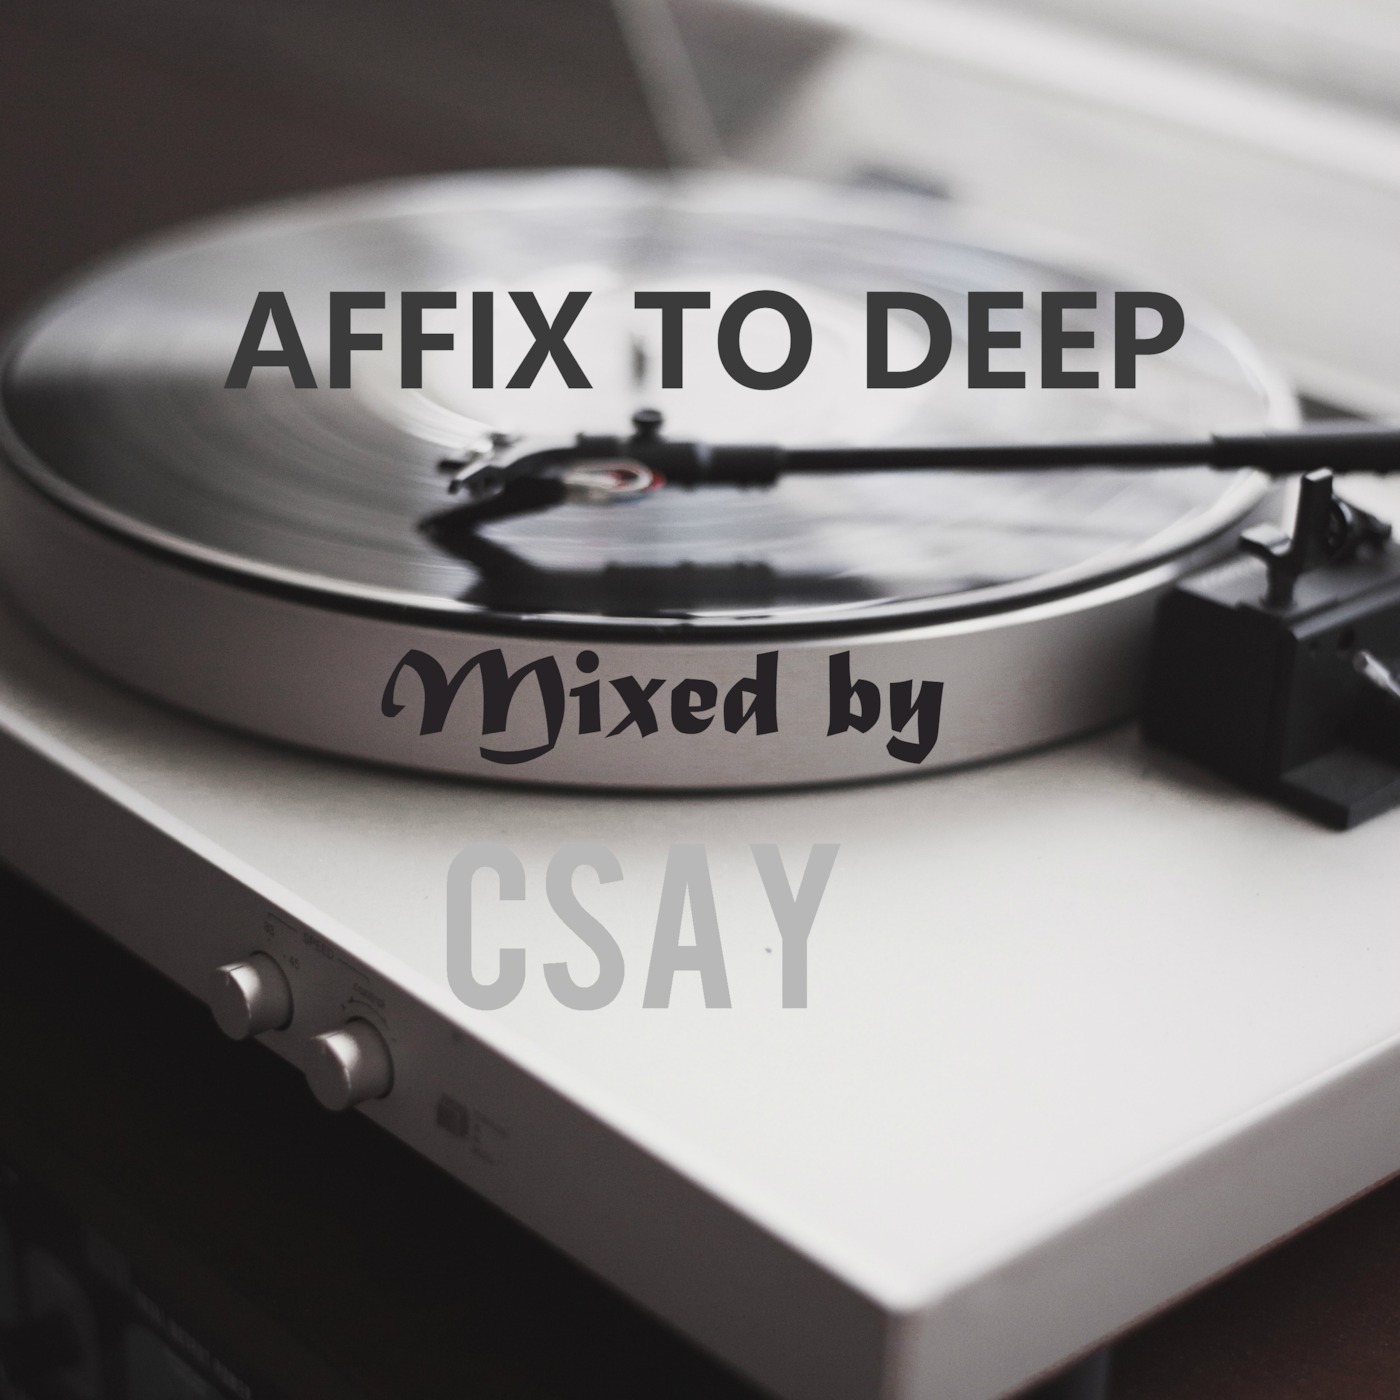 Affix To Deep - Mixed by CSAY